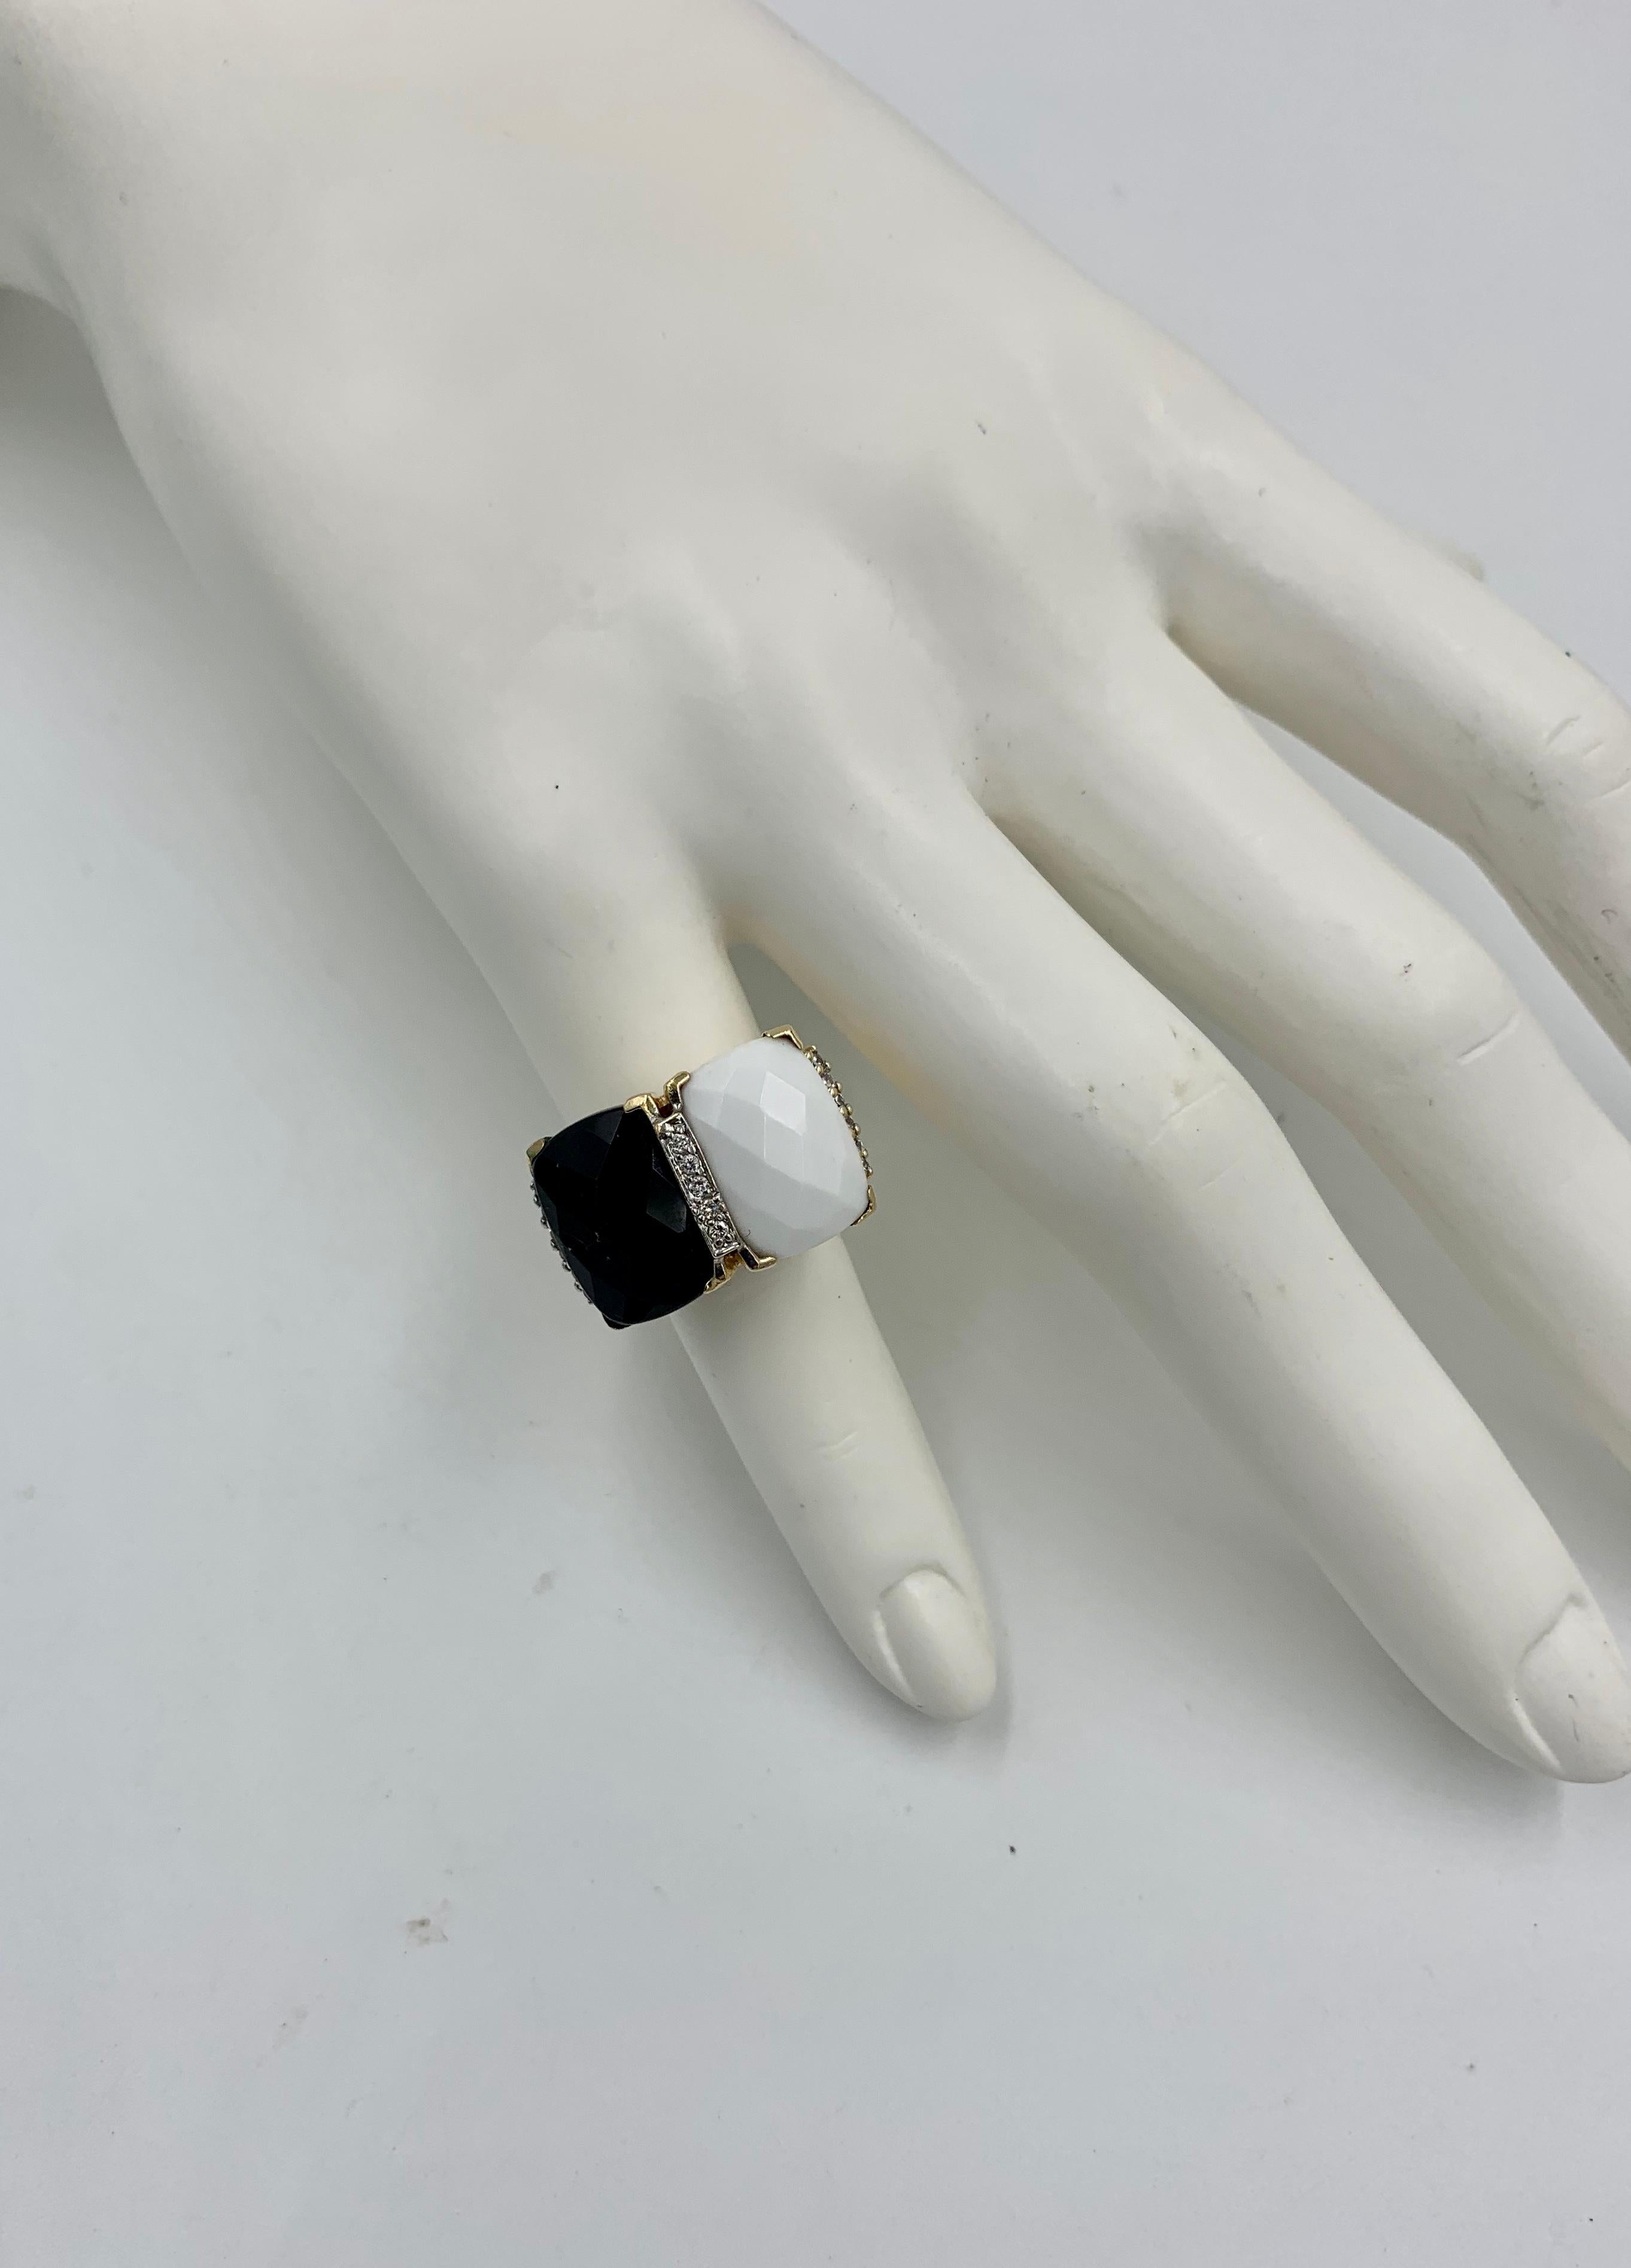 A classic Retro Ring with Black Onyx and White Onyx rectangular checkerboard cut gems.   The vivid Onyx is accented by 15 sparkling white Diamonds.  I just love the dramatic black and white Onyx together with the diamonds.  The jewels are set in 14